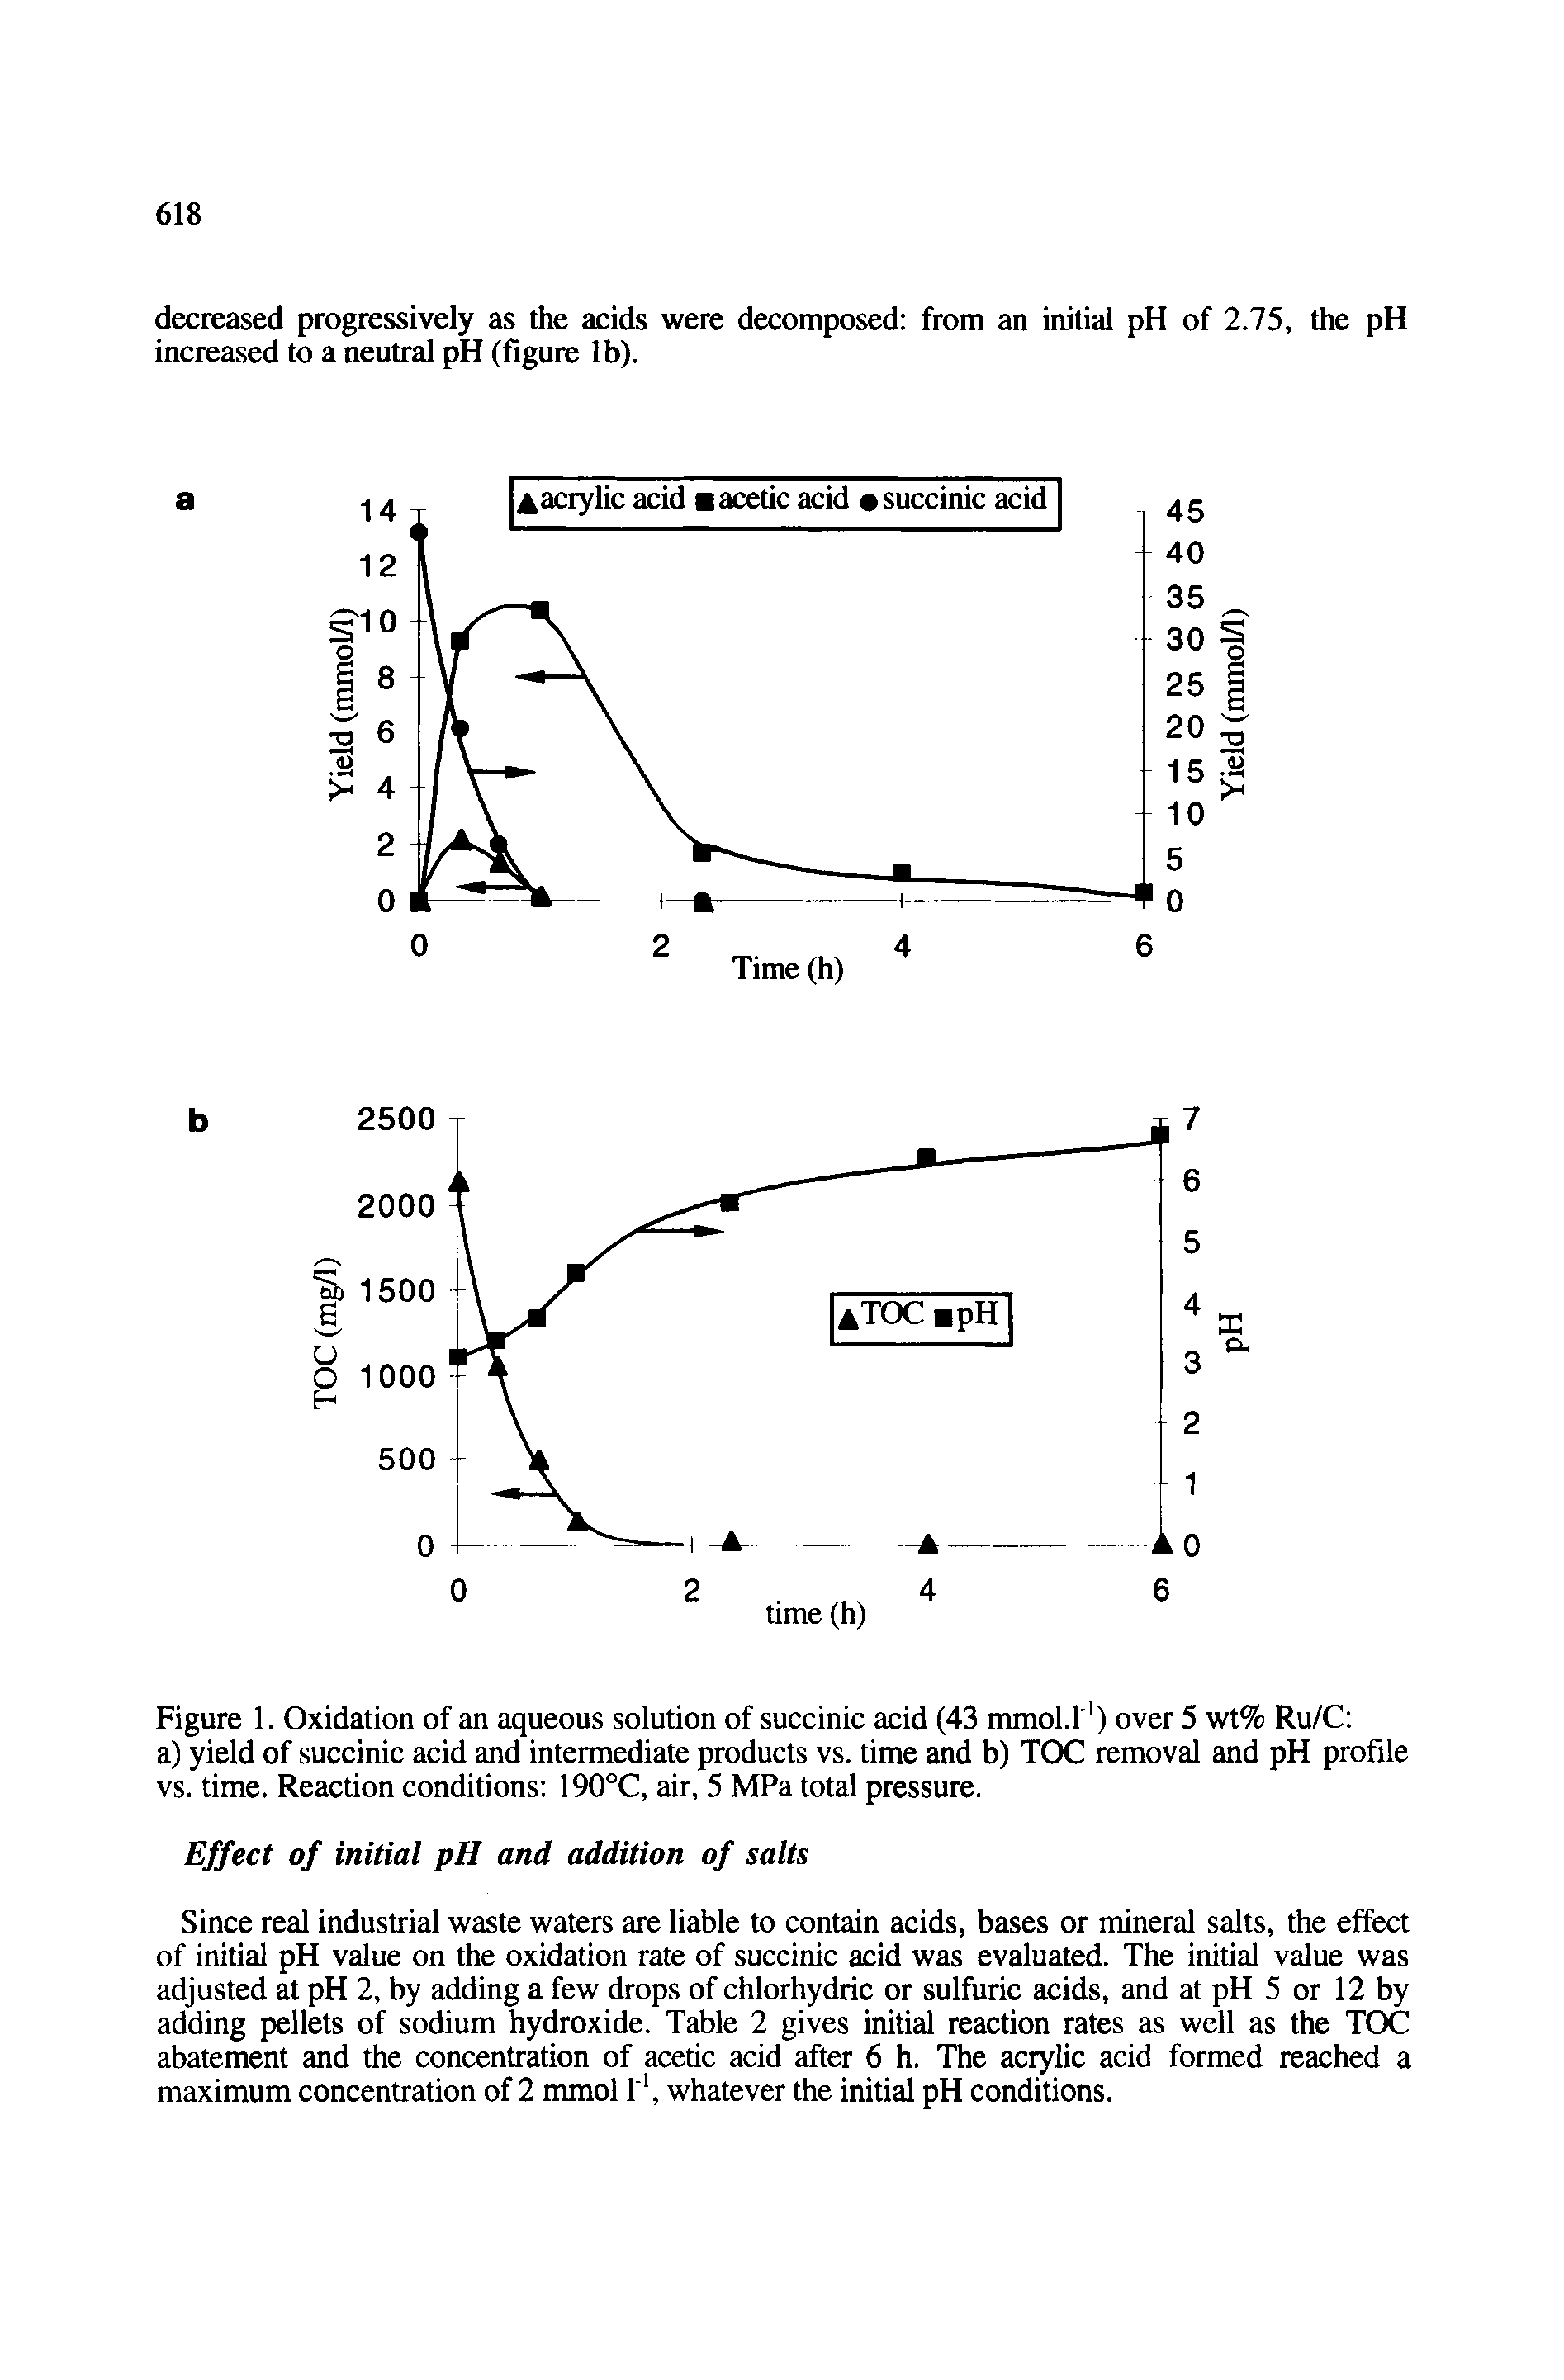 Figure 1. Oxidation of an aqueous solution of succinic acid (43 mmol.r ) over 5 wt% Ru/C a) yield of succinic acid and intermediate products vs. time and b) TOC removal and pH profile vs. time. Reaction conditions 190°C, air, 5 MPa total pressure.